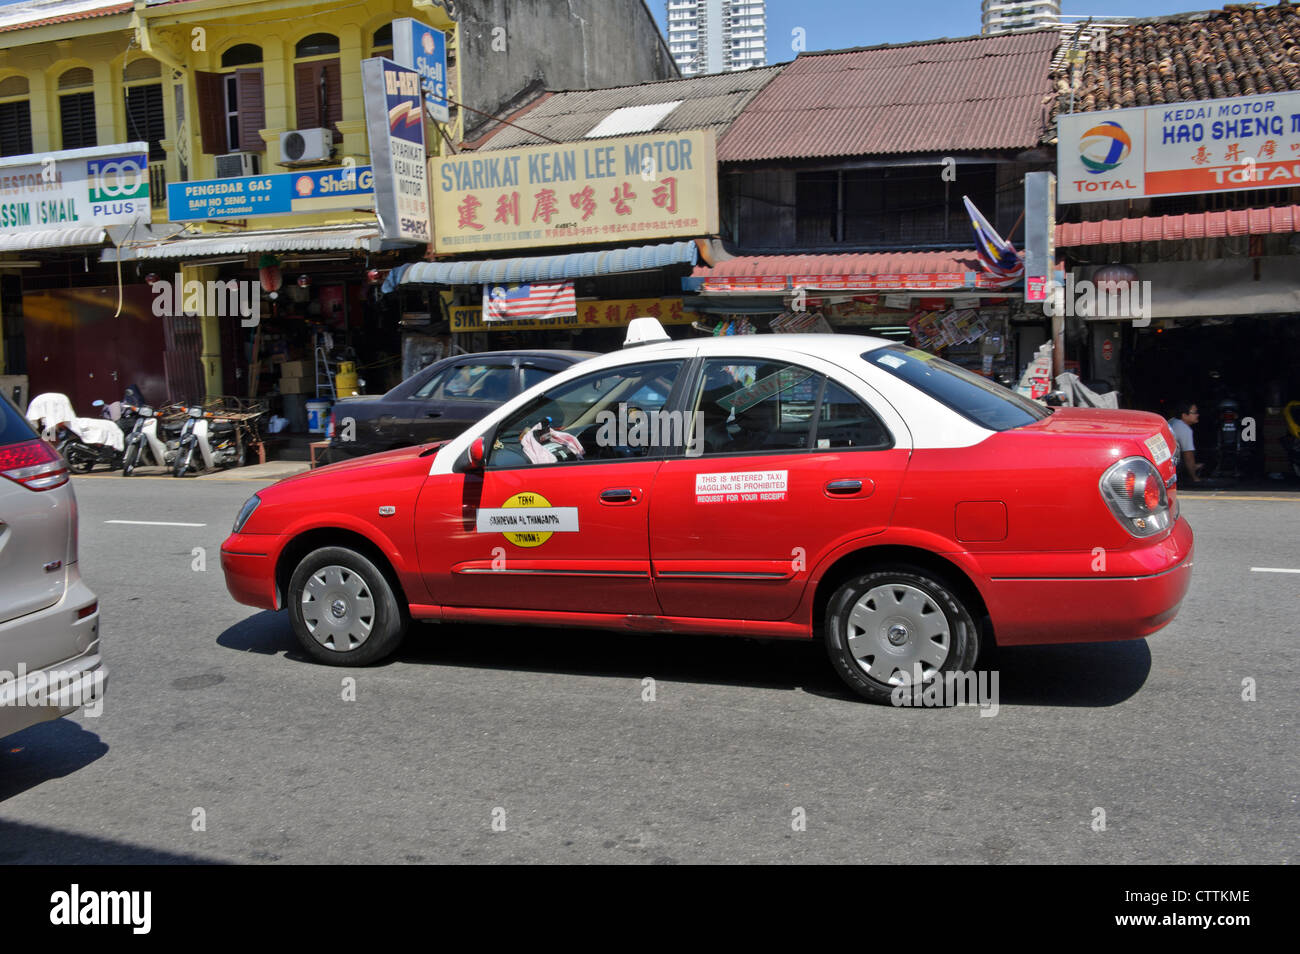 Taxi rouge, Georgetown, Penang, Malaisie. Banque D'Images